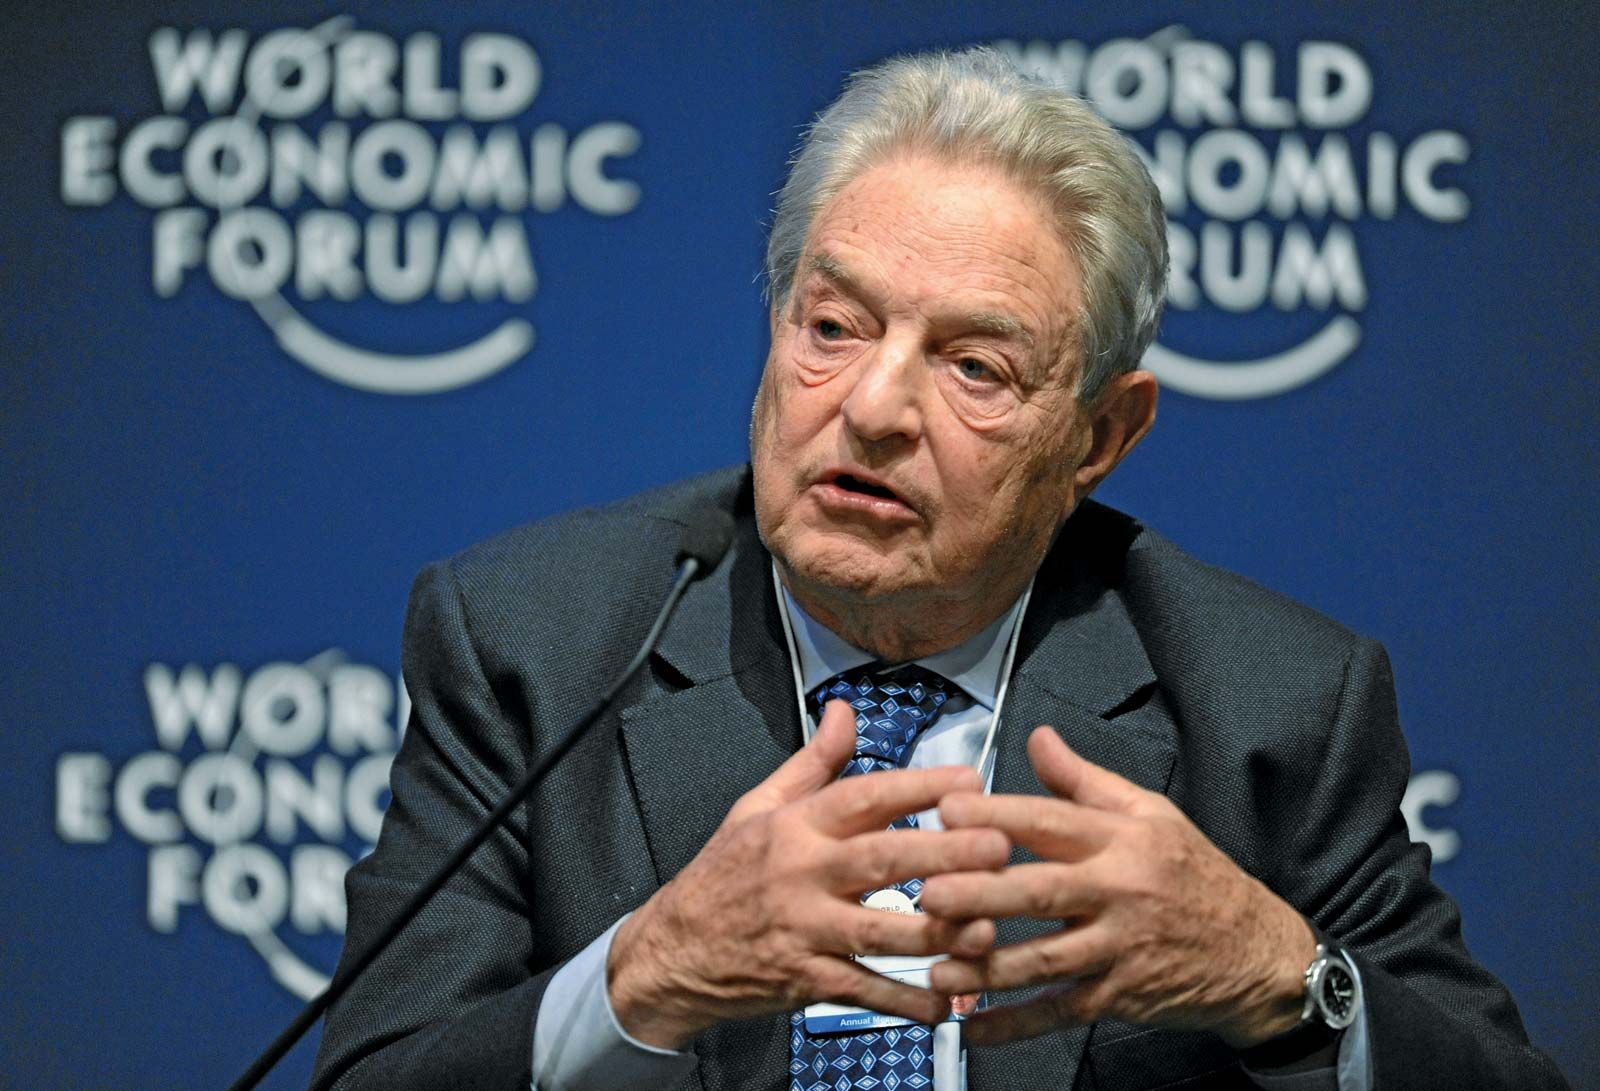 George Soros. Biography & Facts